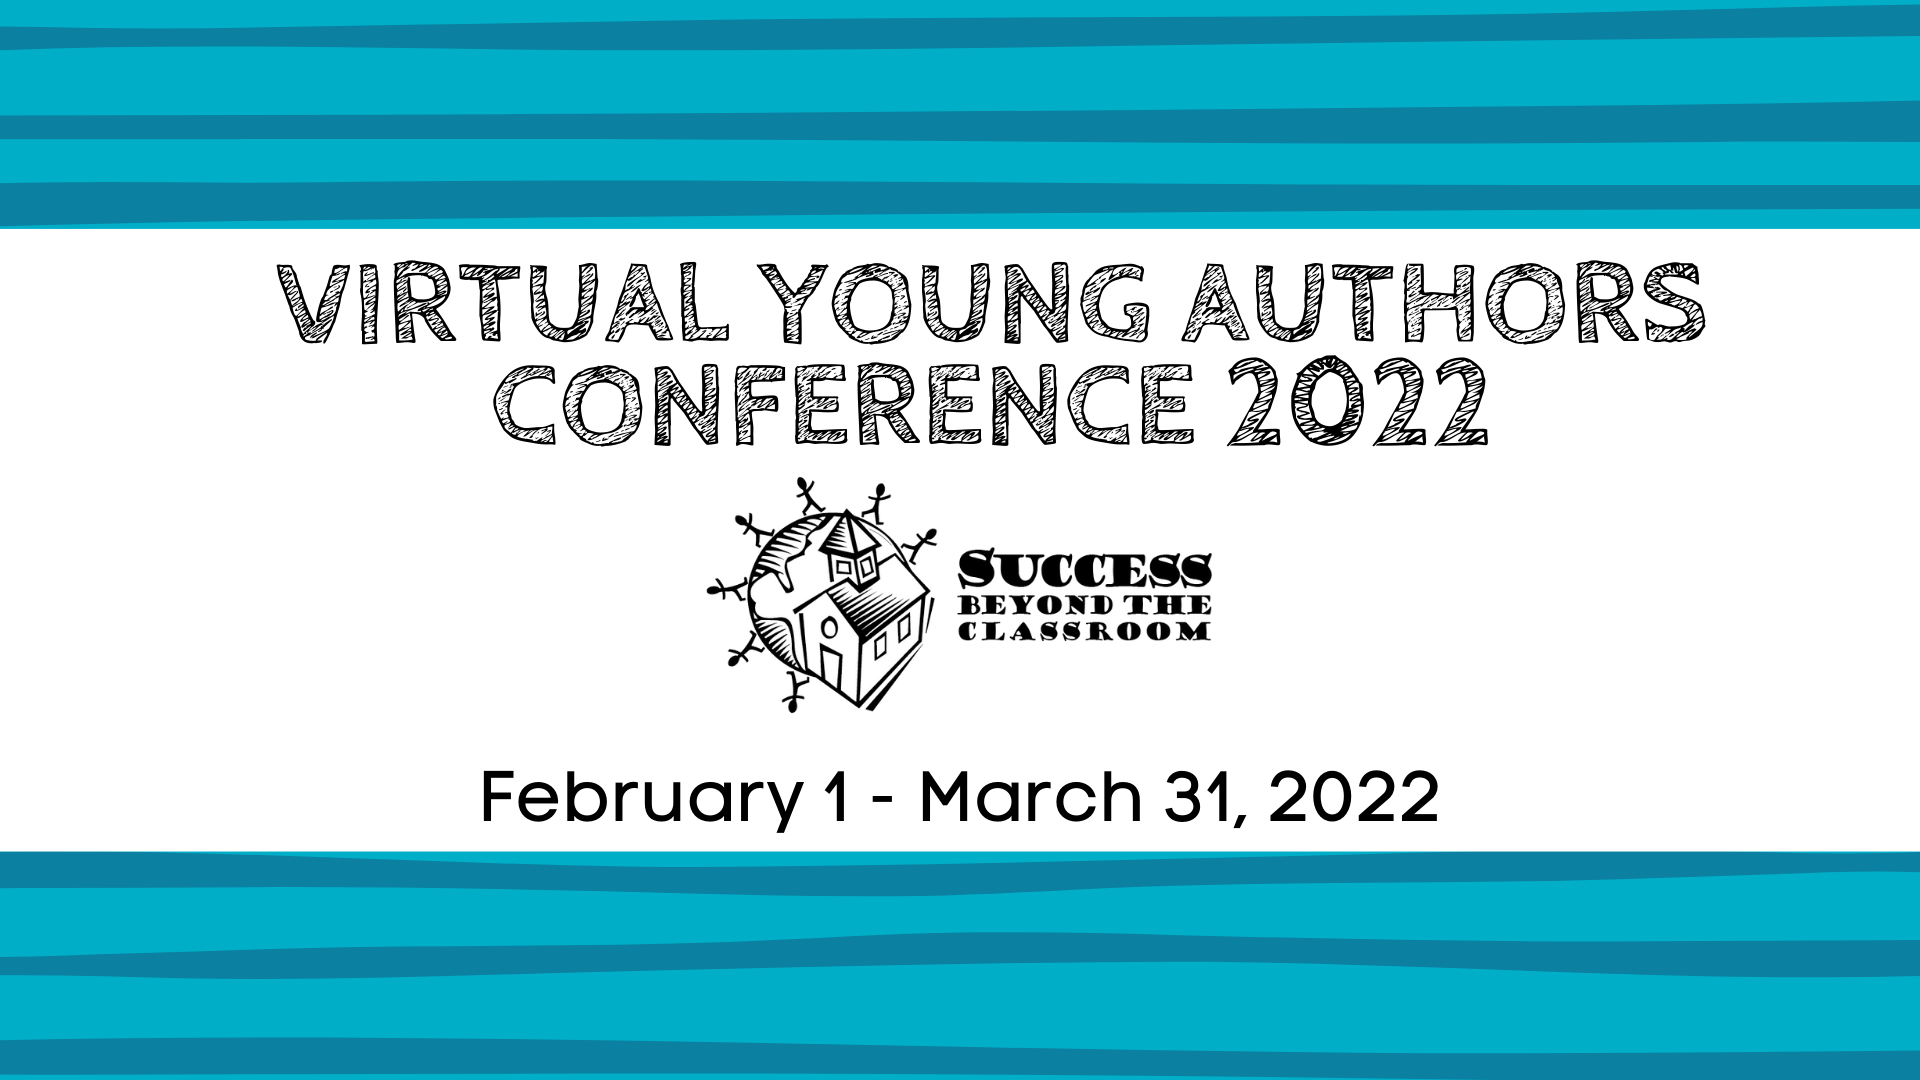 Virtual Young Authors Conference 2022  February 1 to March 31, 2022